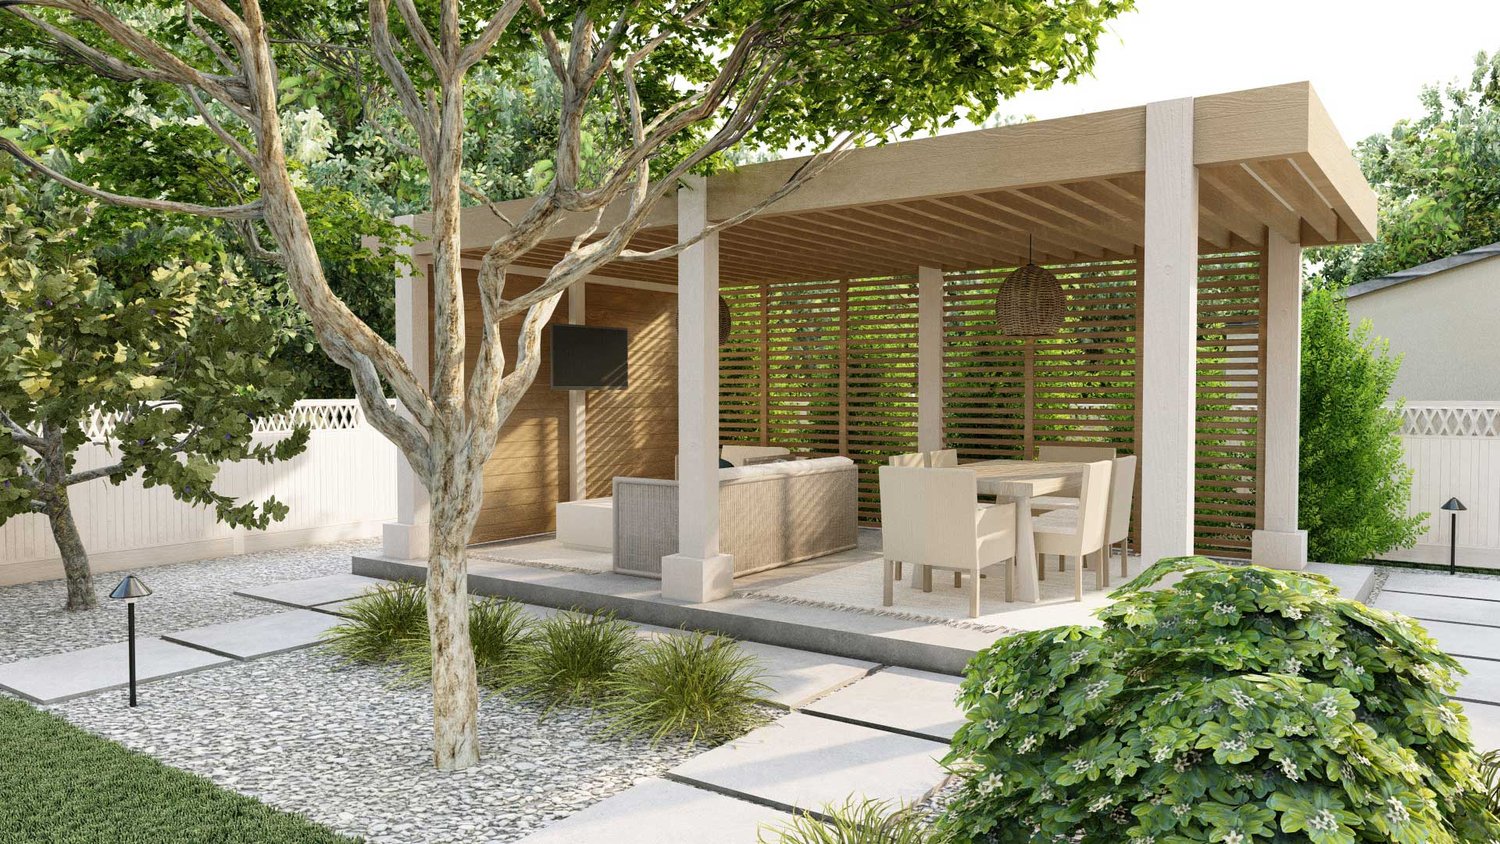 Thousand Oaks courtyard showing tree in gravel in front of a deck patio with pergola over dining and lounging area